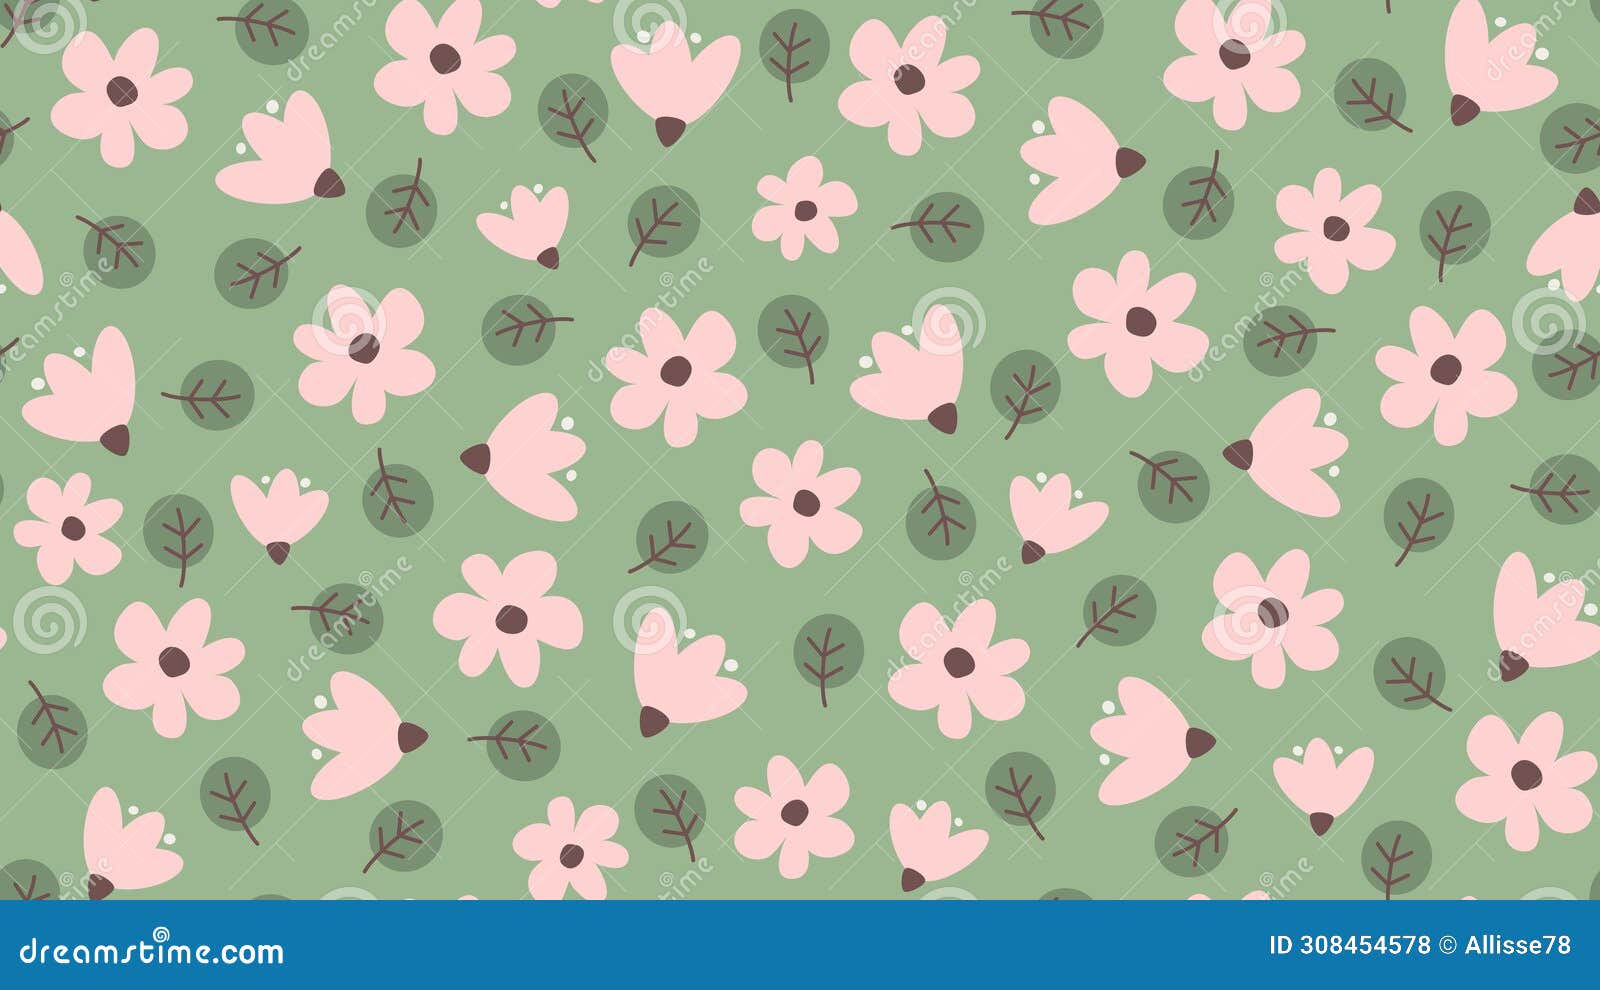 seamless  pattern background  with pink daisy flowers and green rounded leaves